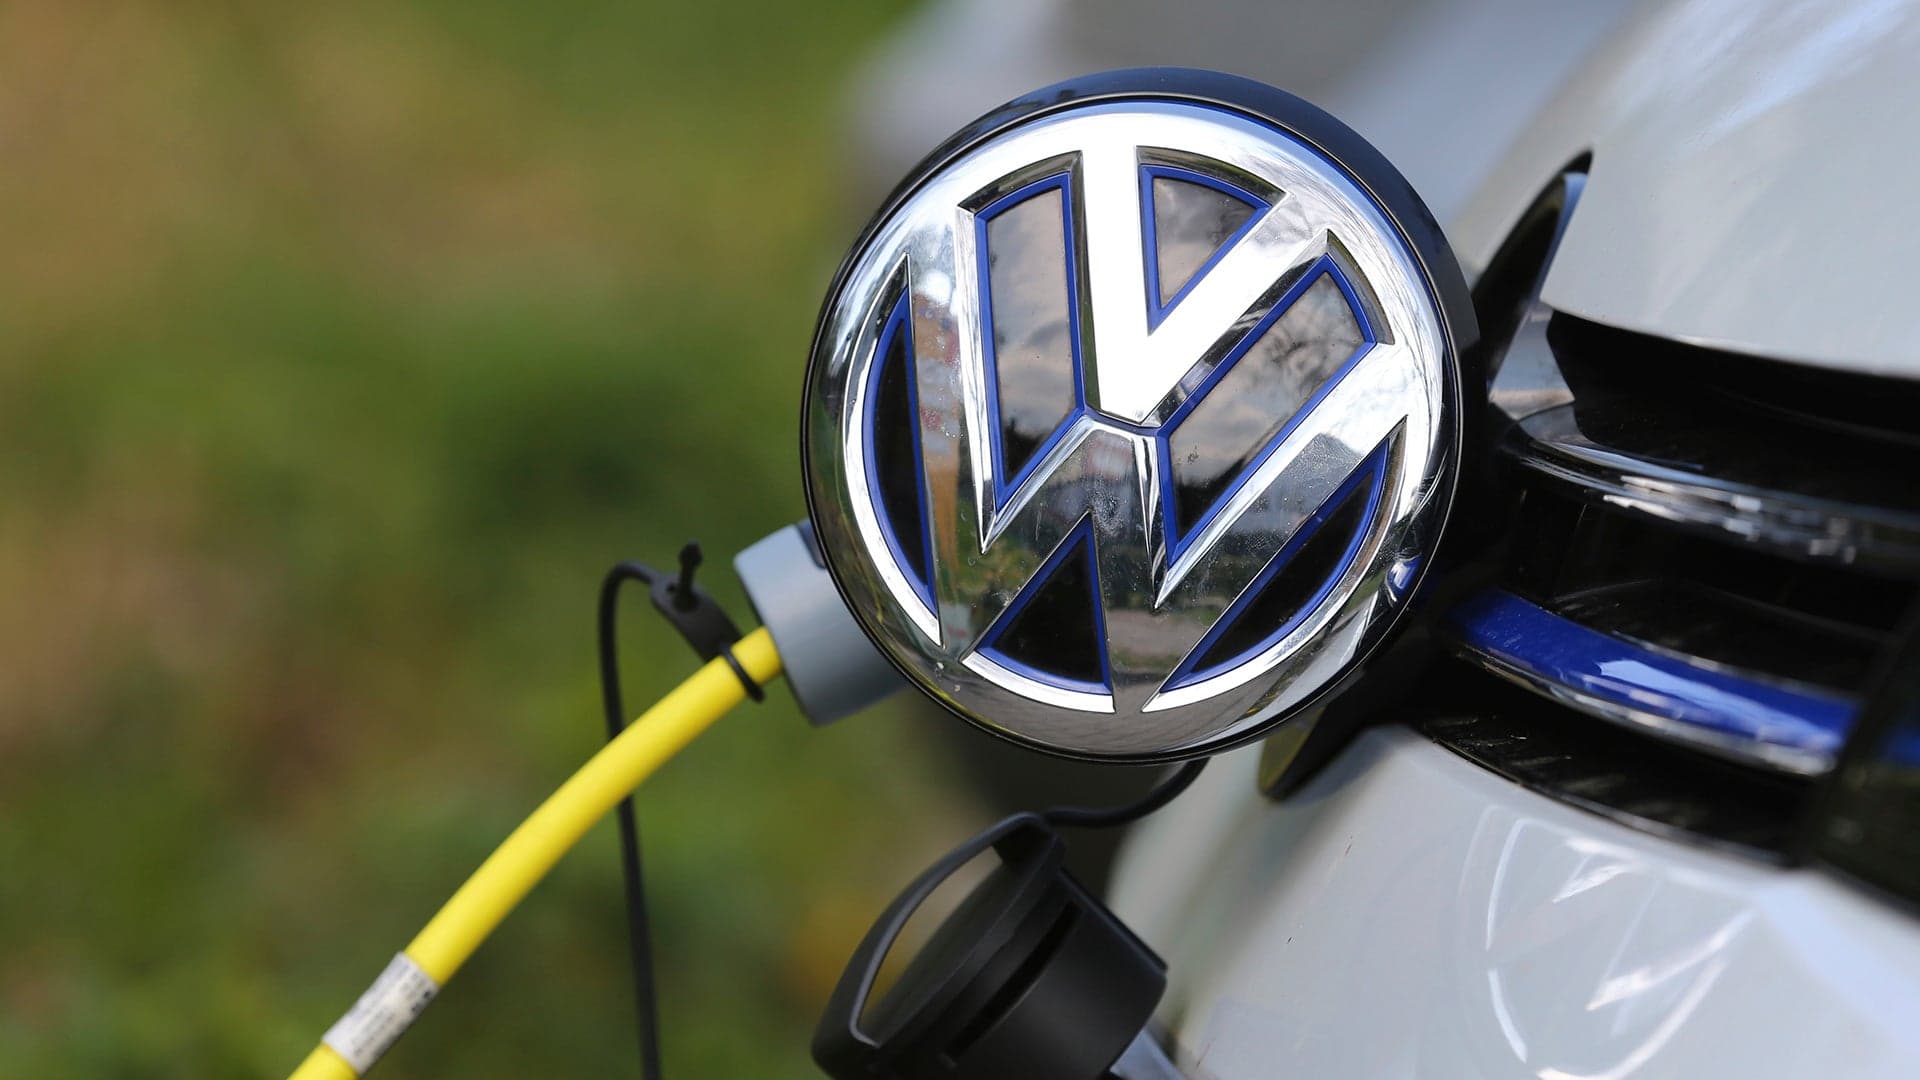 California Tells VW to Build More Electric Car Chargers in Poor Neighborhoods